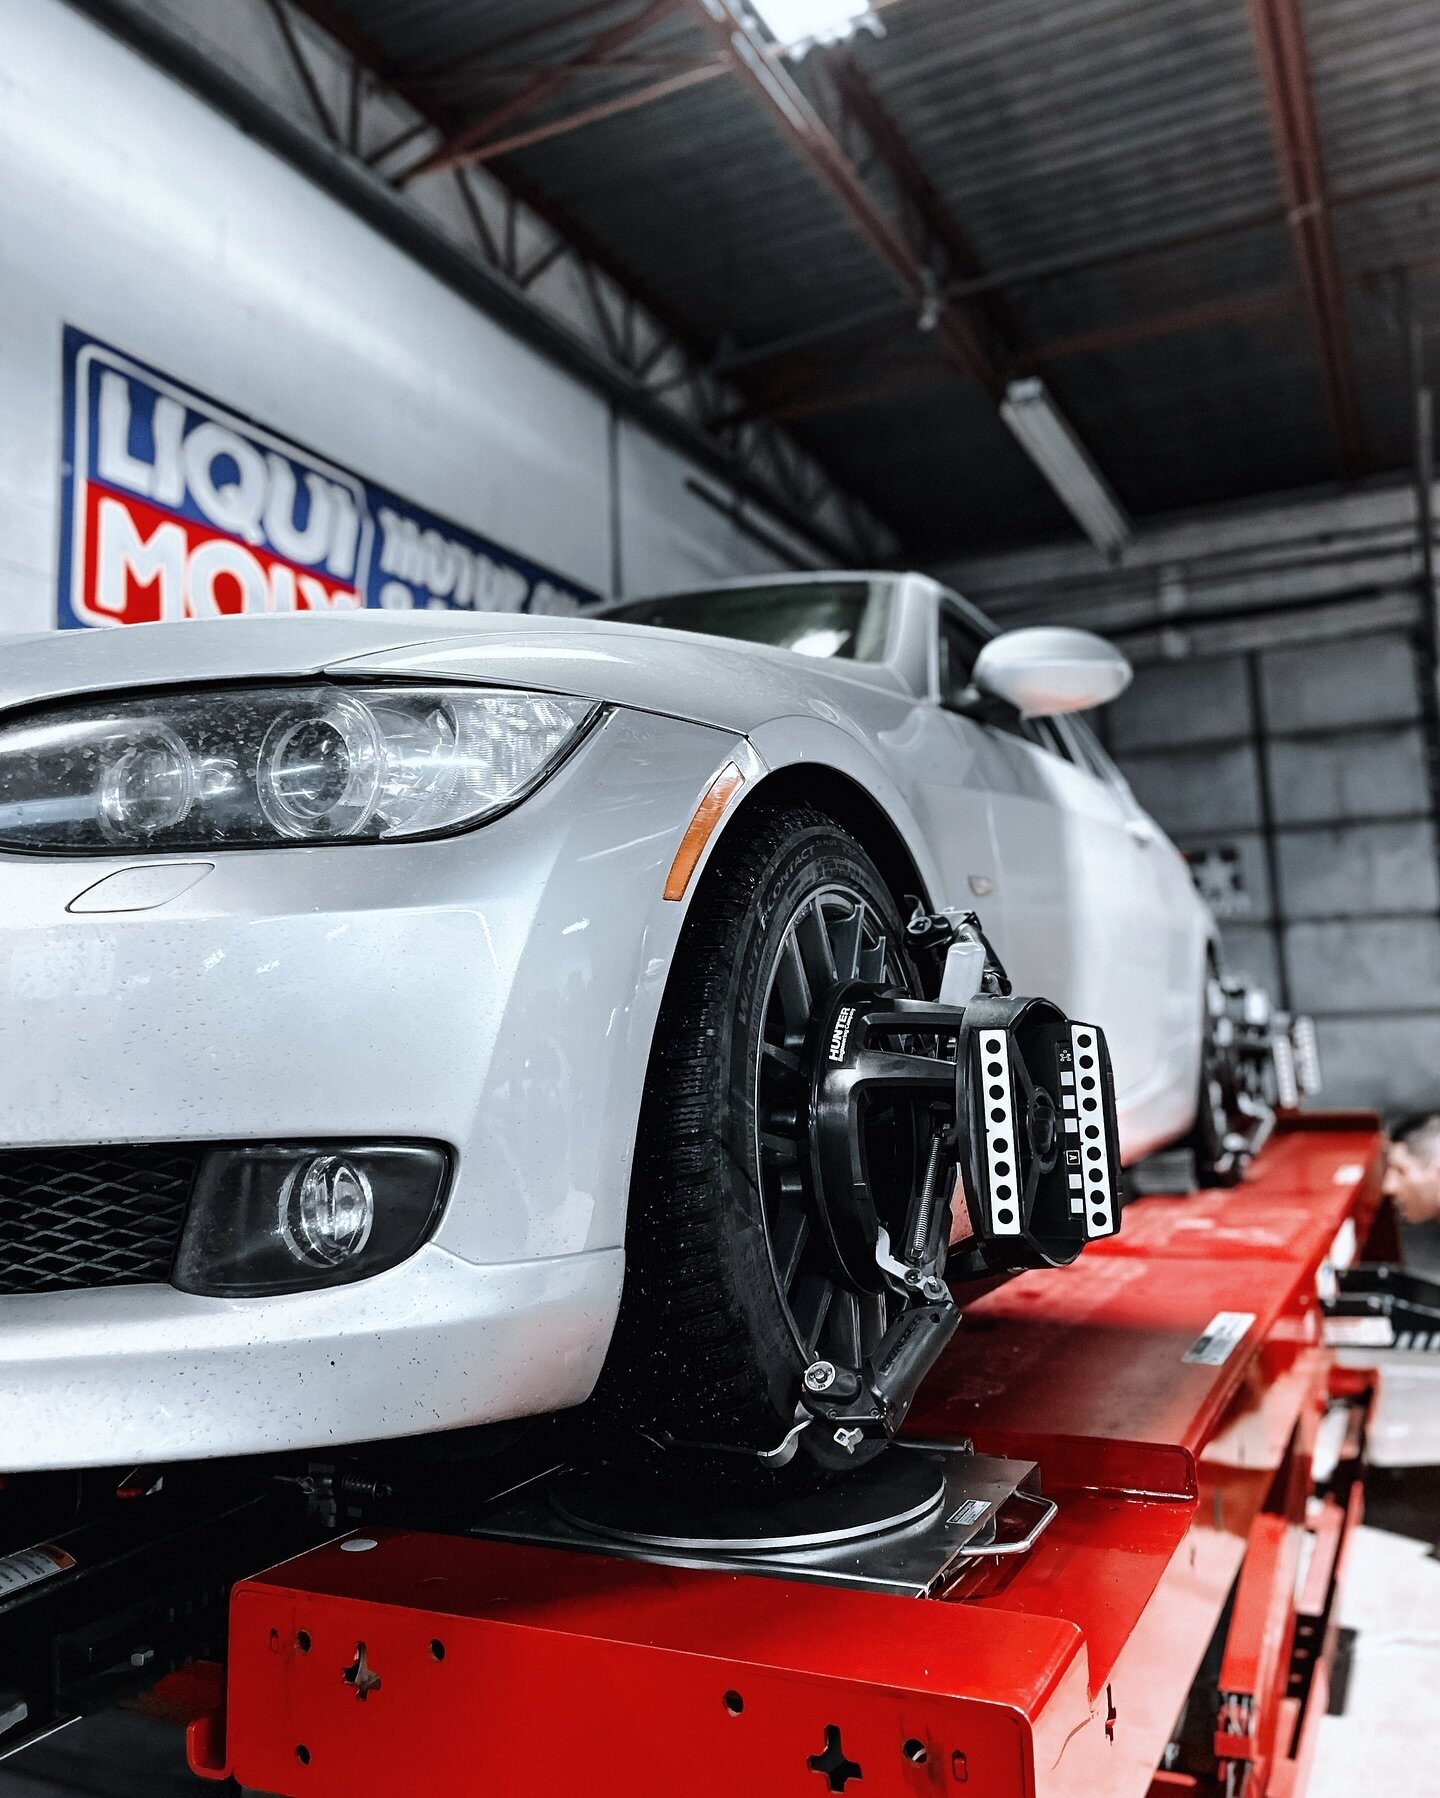 Our @hunterengineering precision alignment rack getting put to good use! 🏁

From Precise alignments, to corner balances and more, We offer a wide range of services to fit all of your needs from your daily commute driving to high performance track dr